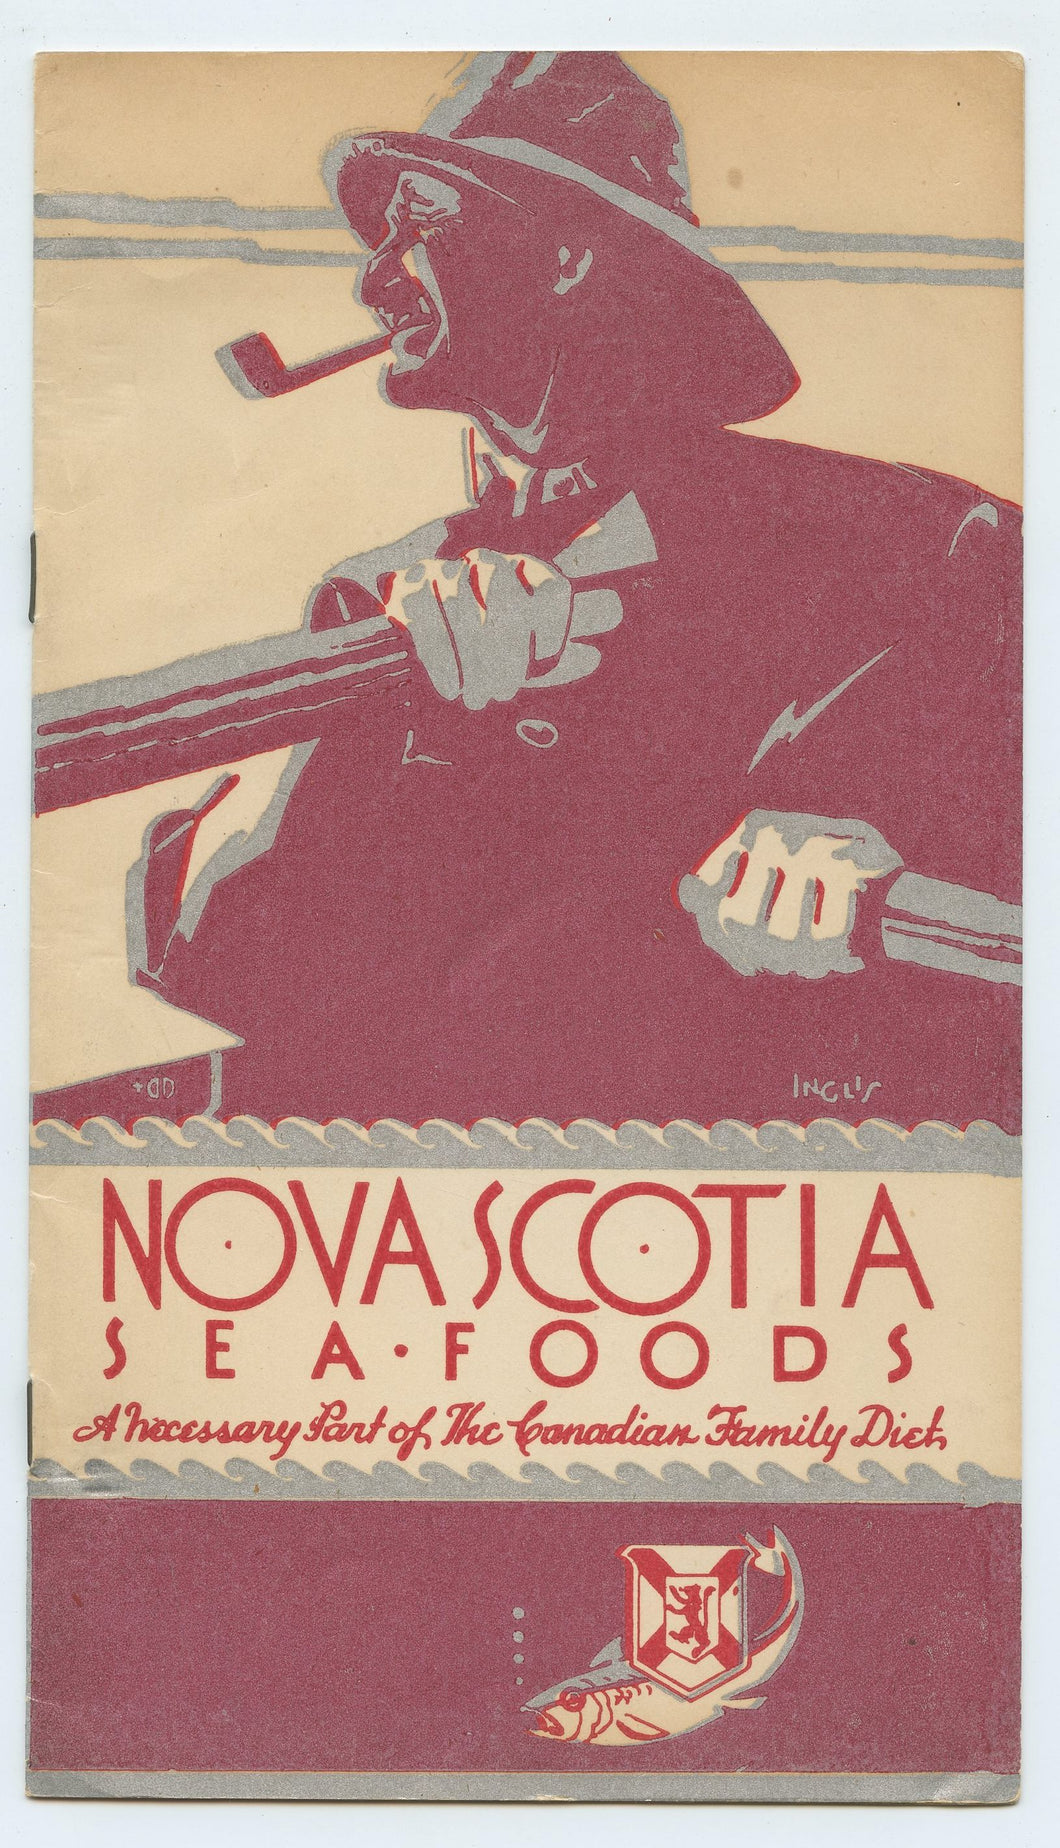 Nova Scotia Seafoods: A Necessary Part of the Canadian Family Diet